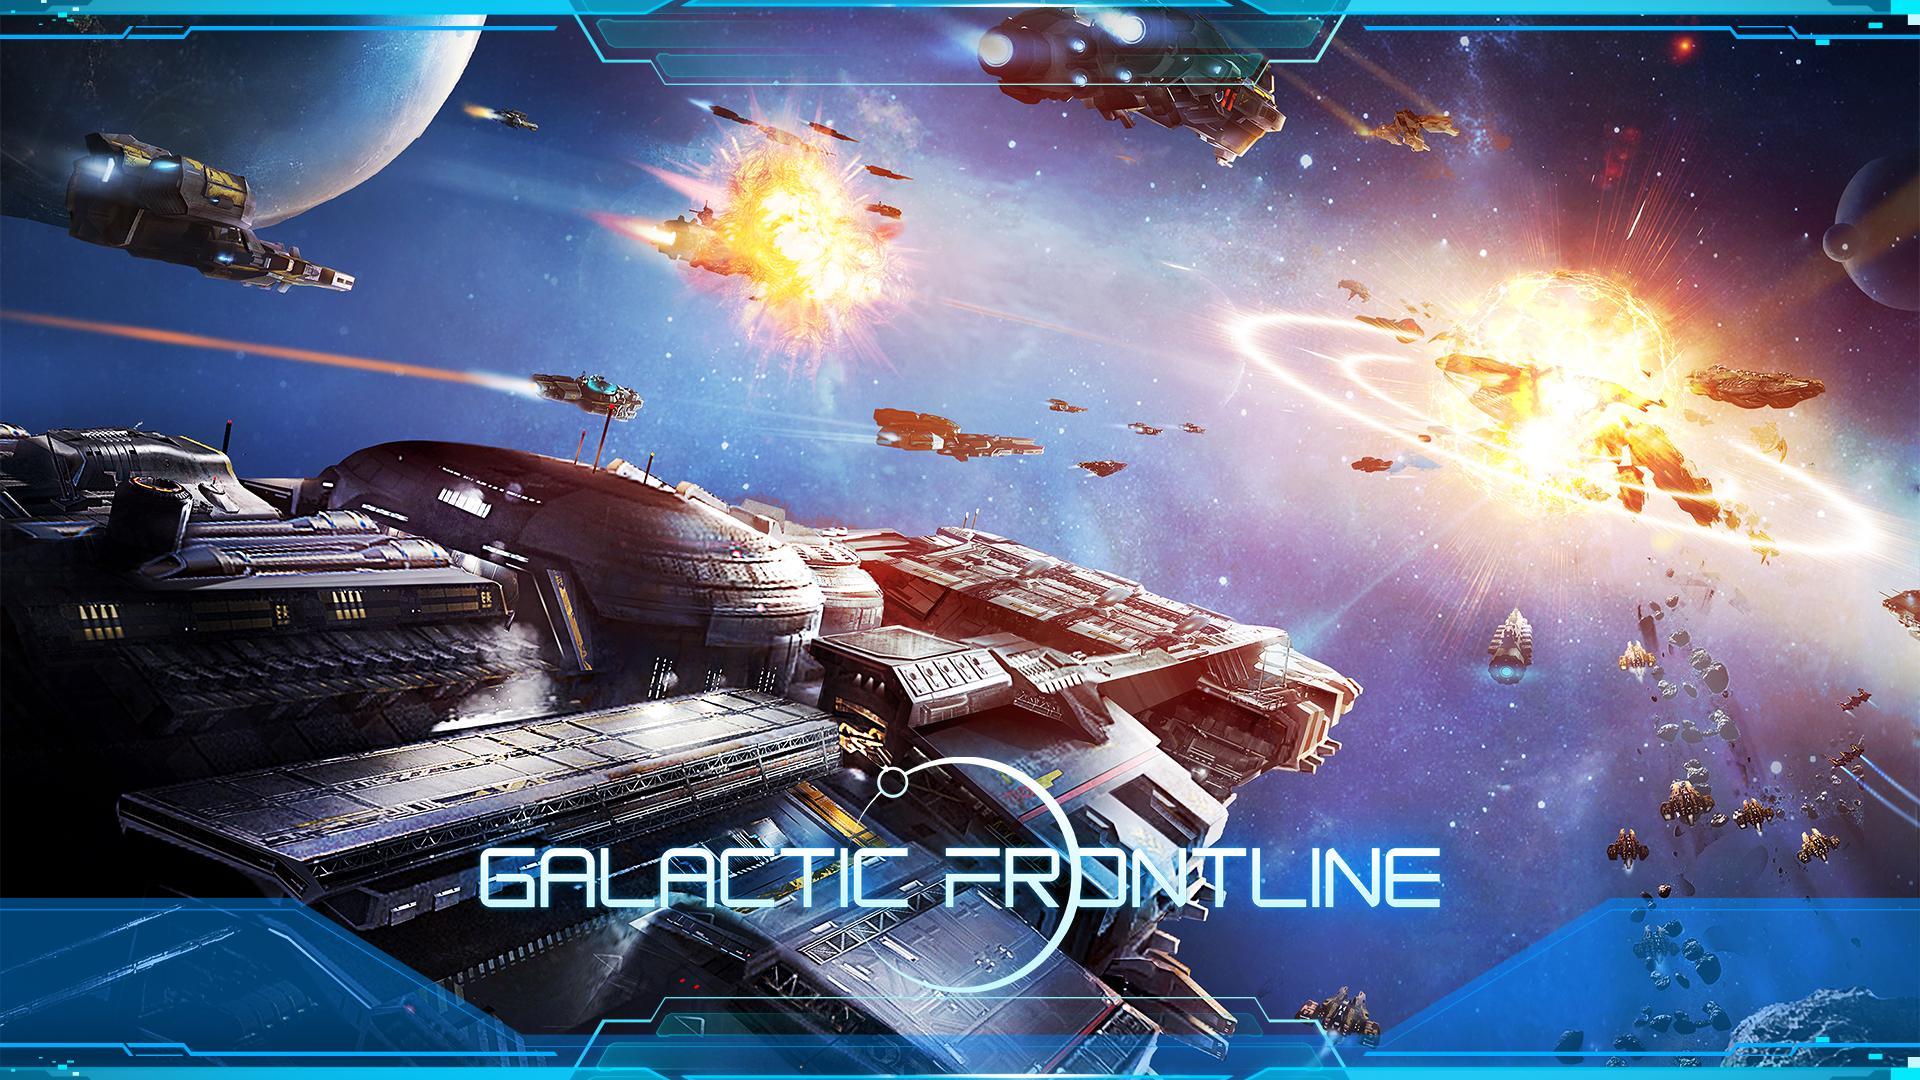 Screenshot 1 of Galactic Frontline: Real-time na Sci-Fi Strategy Game 